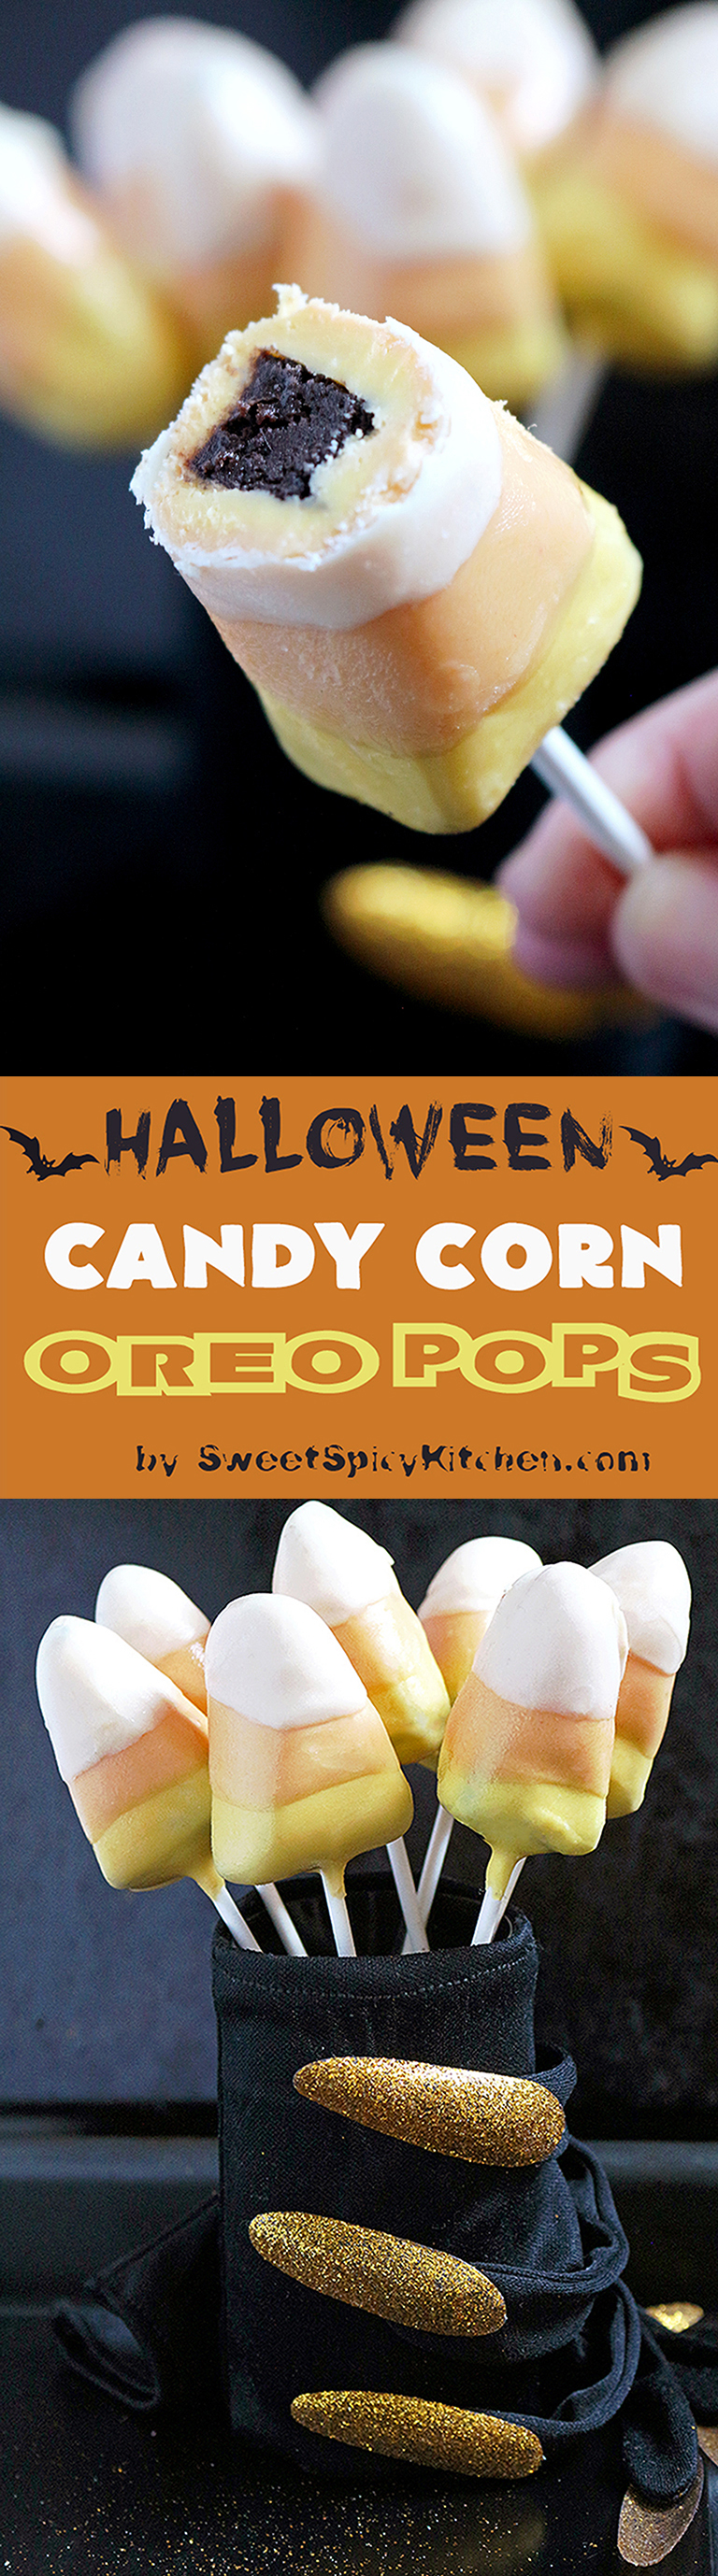 This is my recipe for Halloween. Only three ingredients are enough to make Halloween Candy Corn Oreo Pops. Super easy, no bake recipe.